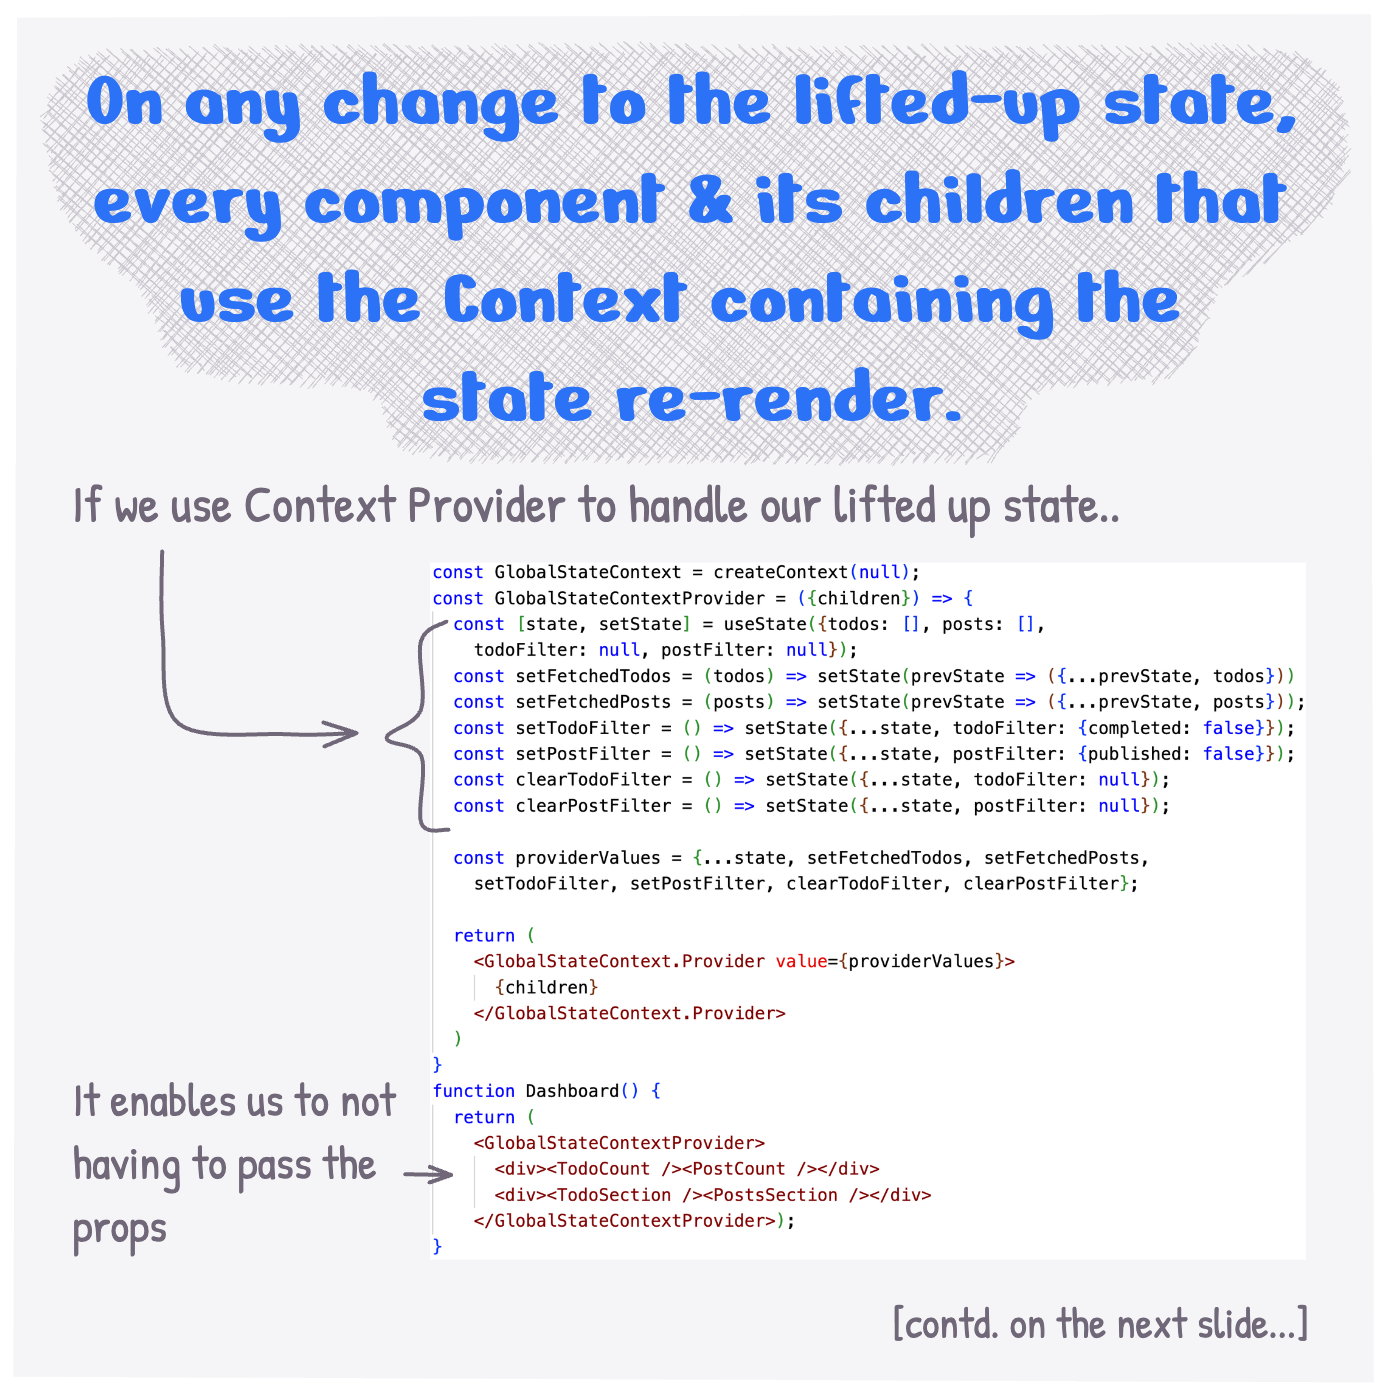 On any change to the lifted-up state, every component and its children that use the Context containing the state re-render.